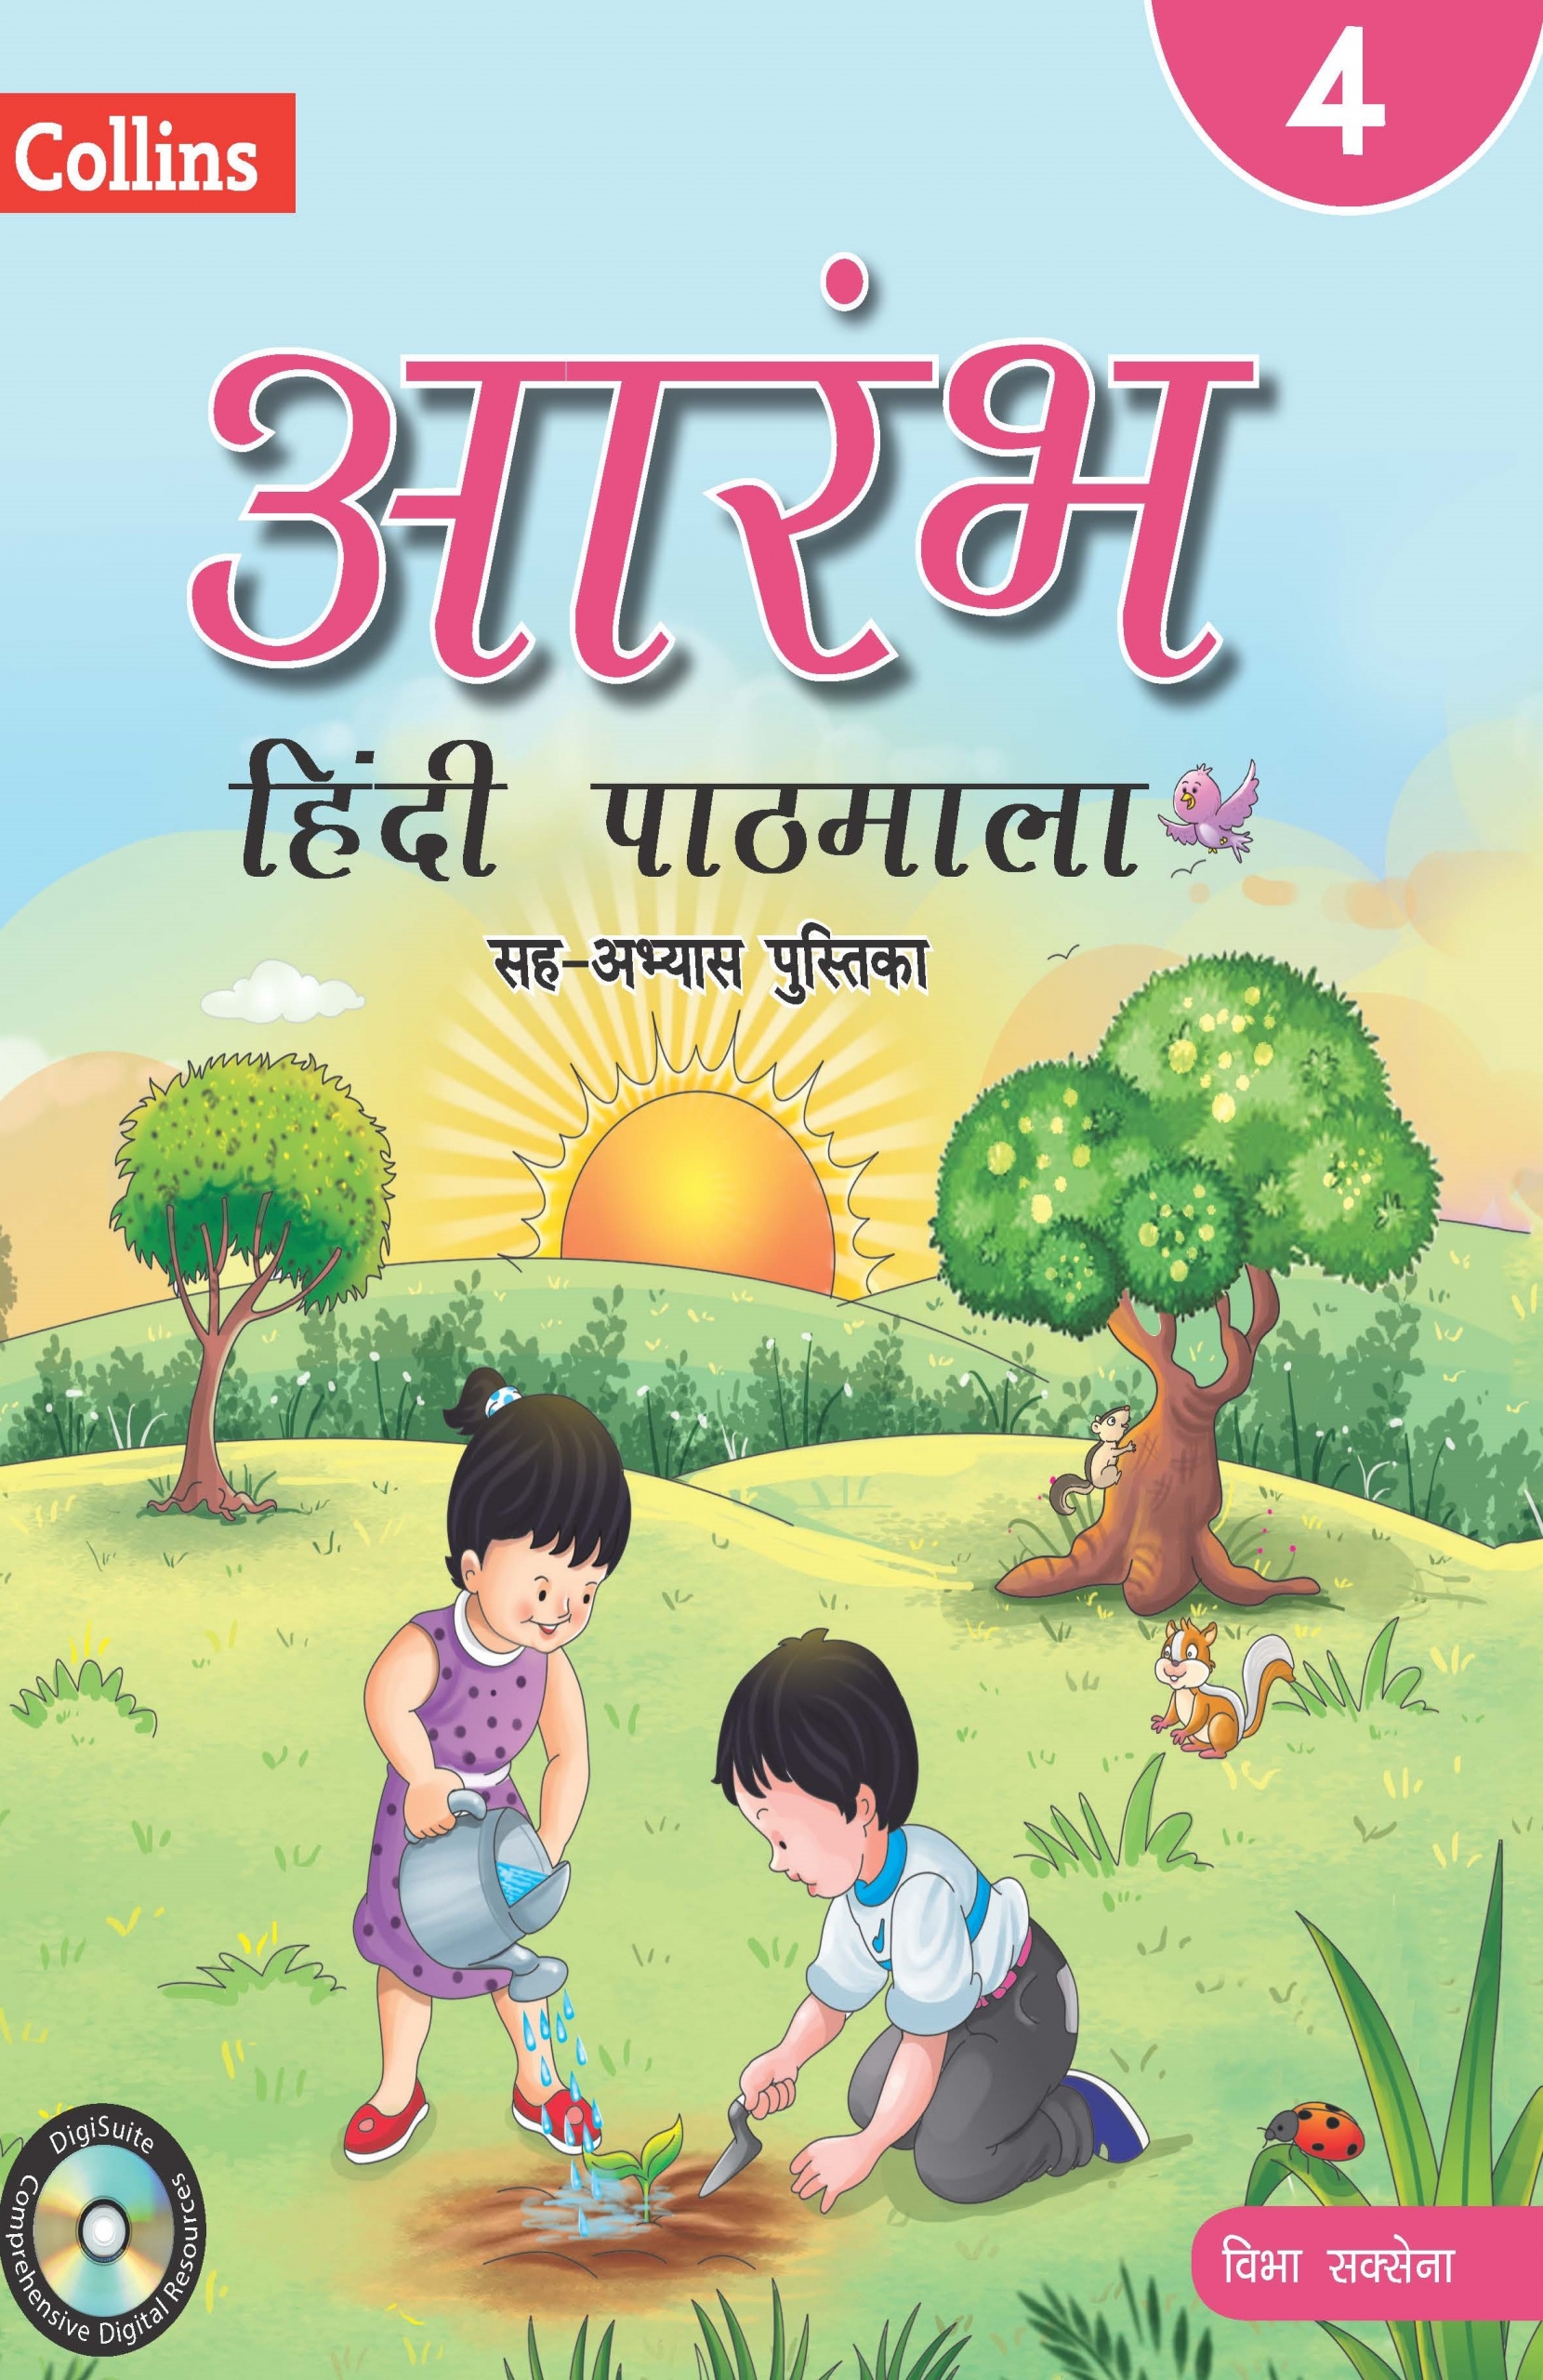 hindi publication house in india